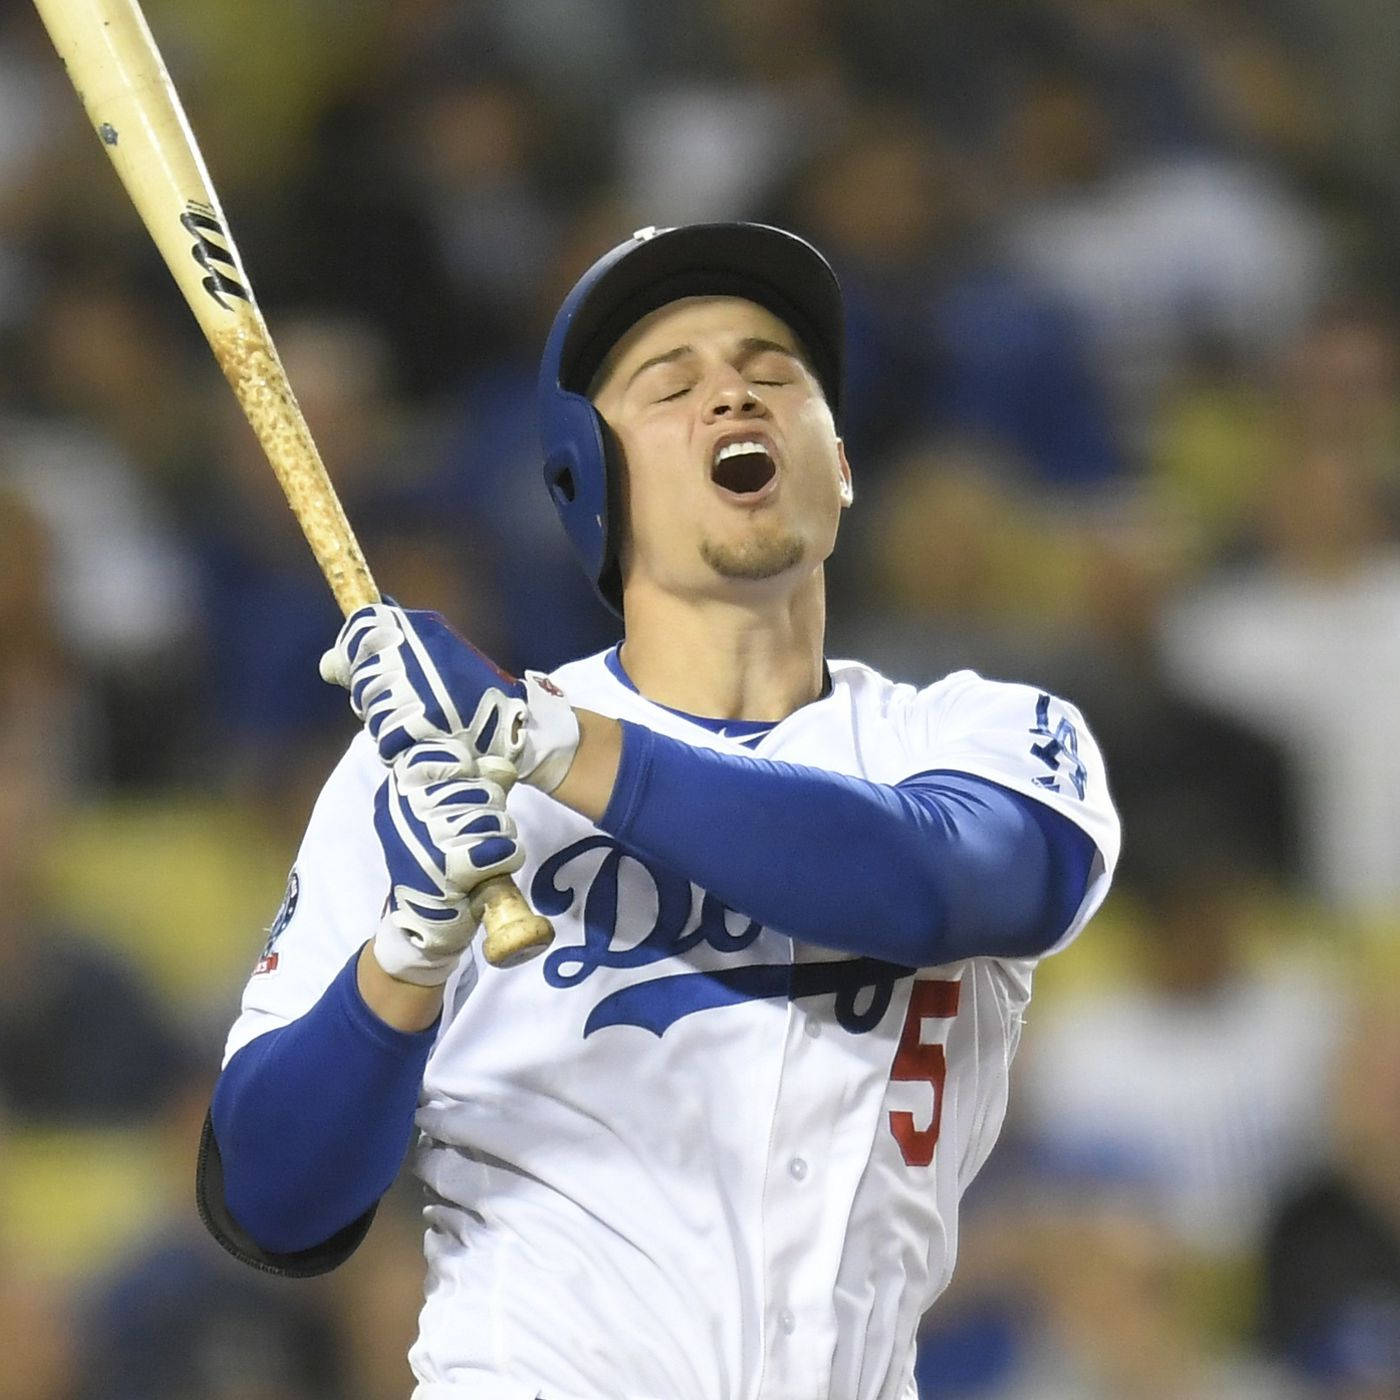 Corey Seager Holding Bat Open Mouth And Eyes Closed Wallpaper